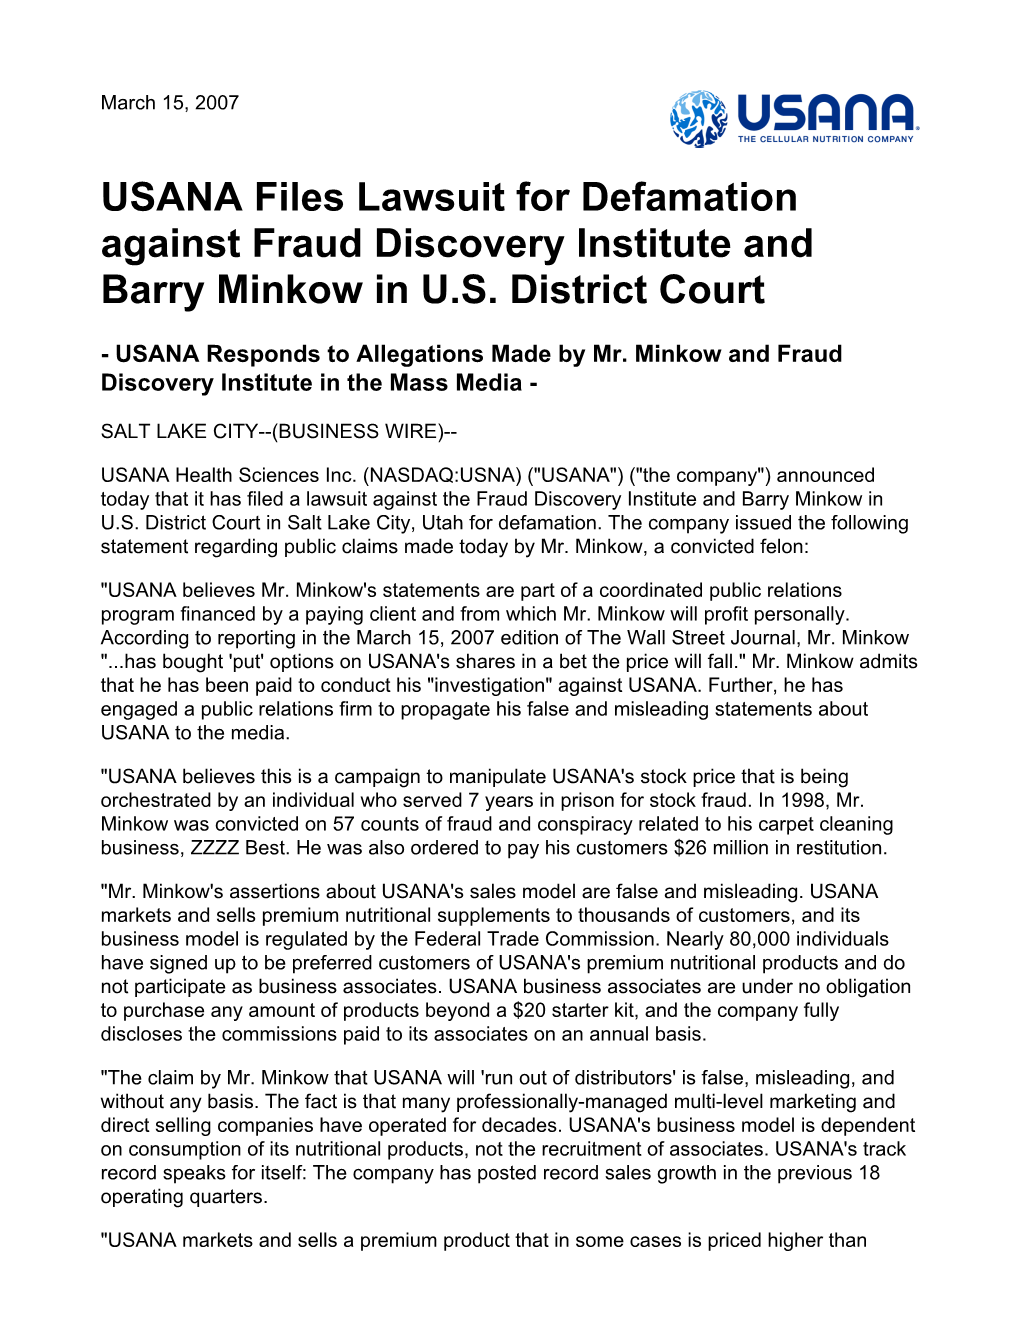 USANA Files Lawsuit for Defamation Against Fraud Discovery Institute and Barry Minkow in U.S. District Court